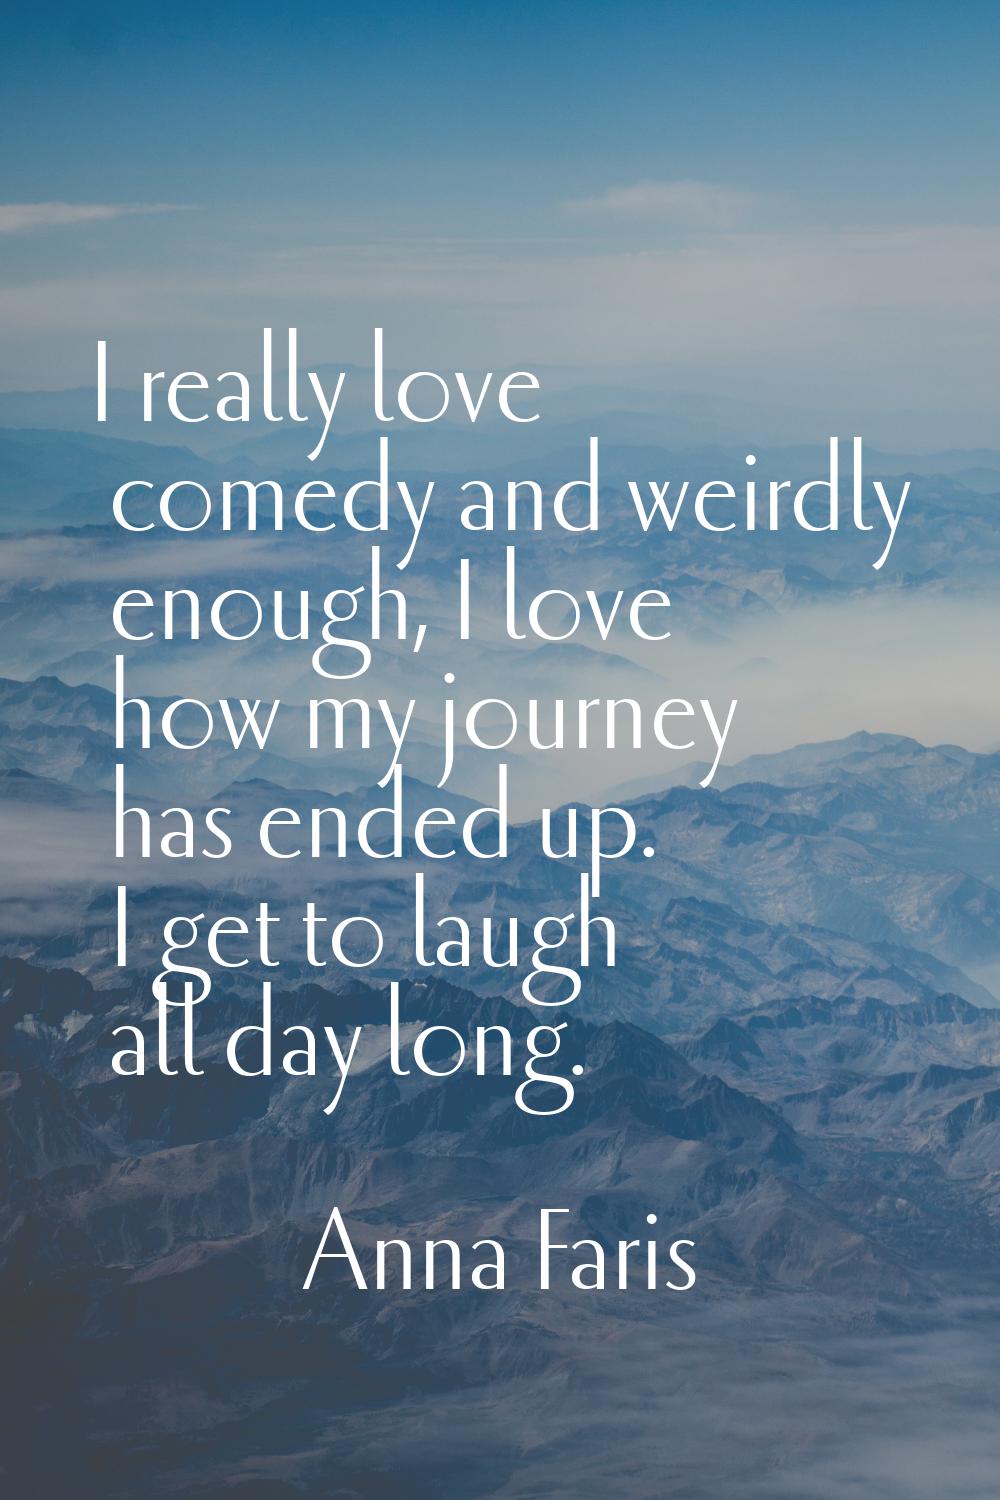 I really love comedy and weirdly enough, I love how my journey has ended up. I get to laugh all day